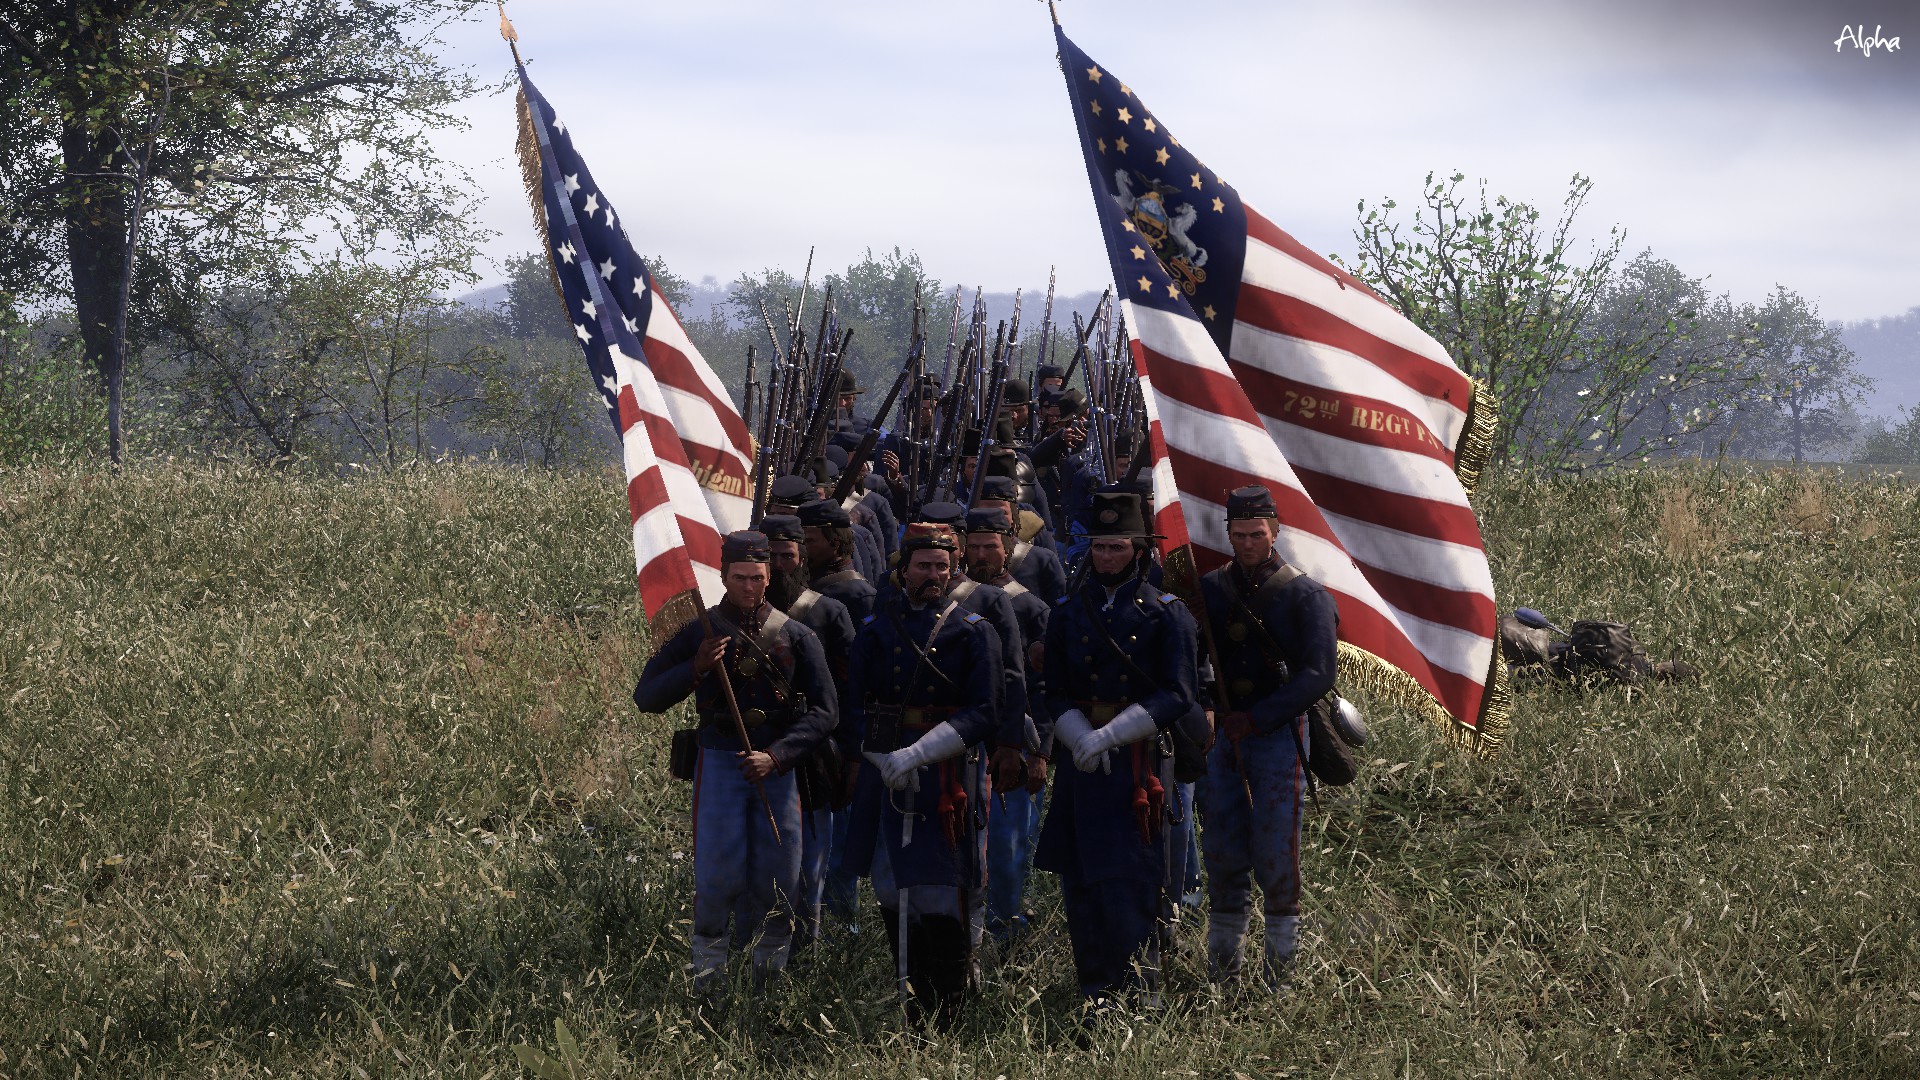 A massed formation of Union Soldiers in Blue Coats